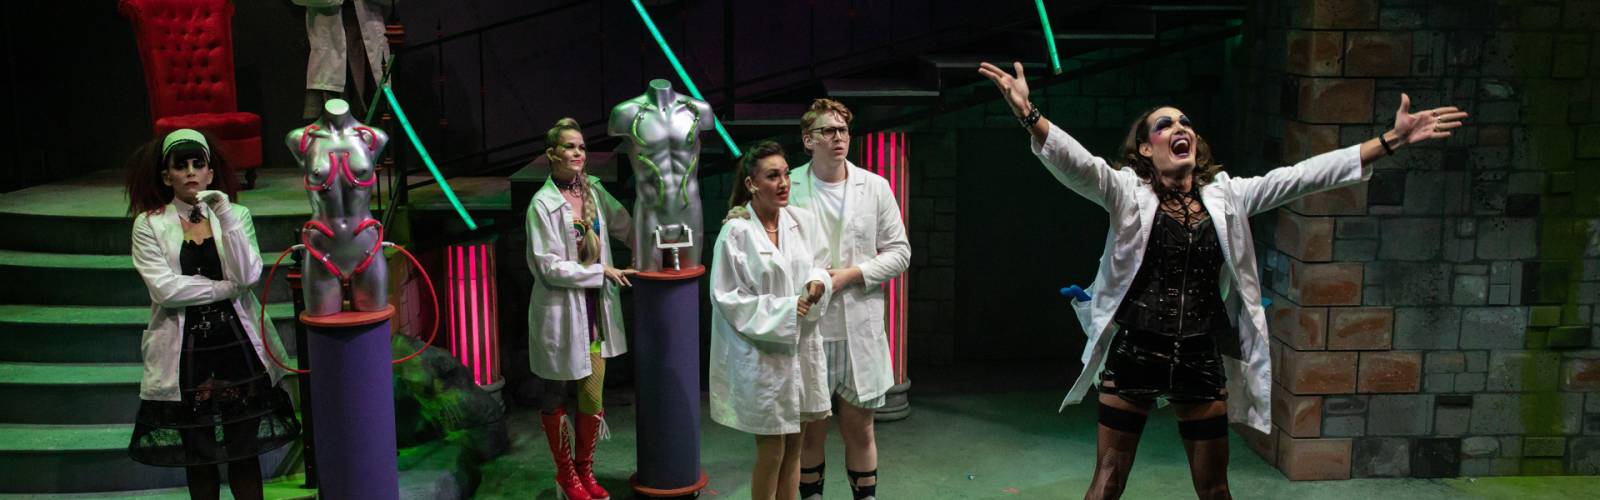 Production shot: Cast in lab coats, Frank with his arms outstretched, excited